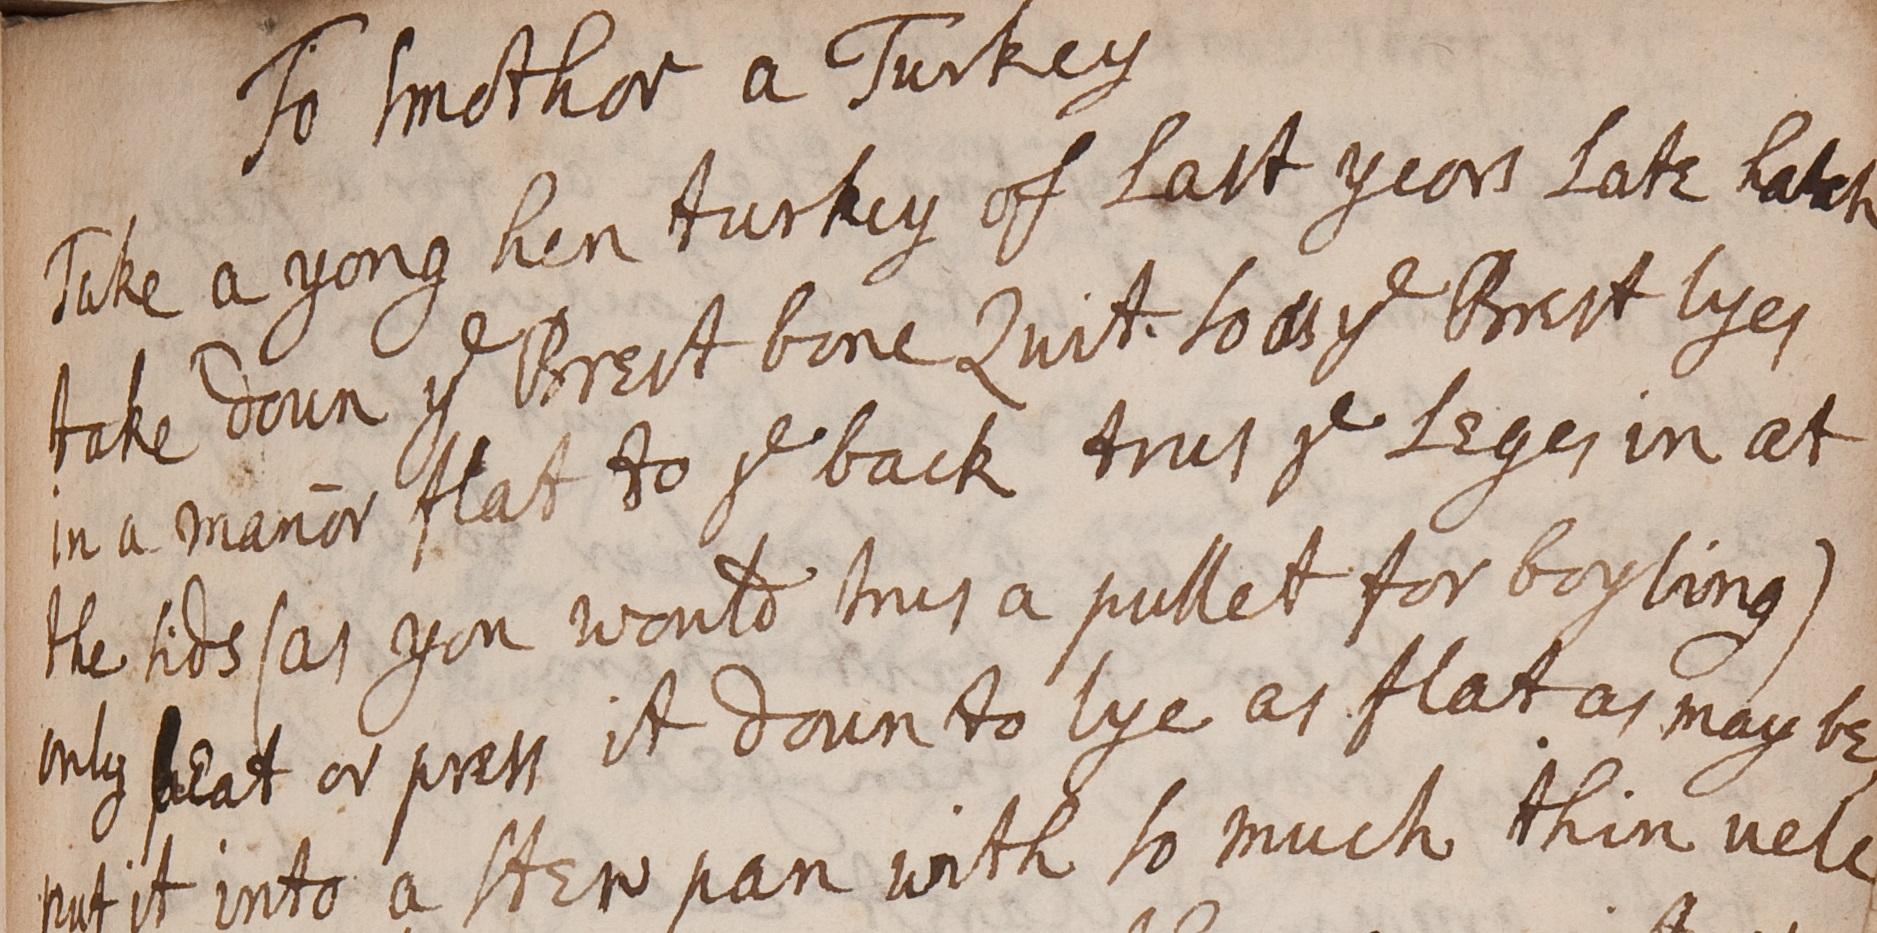 Medical and culinary receipts, 17th-18th century, to smother a turkey